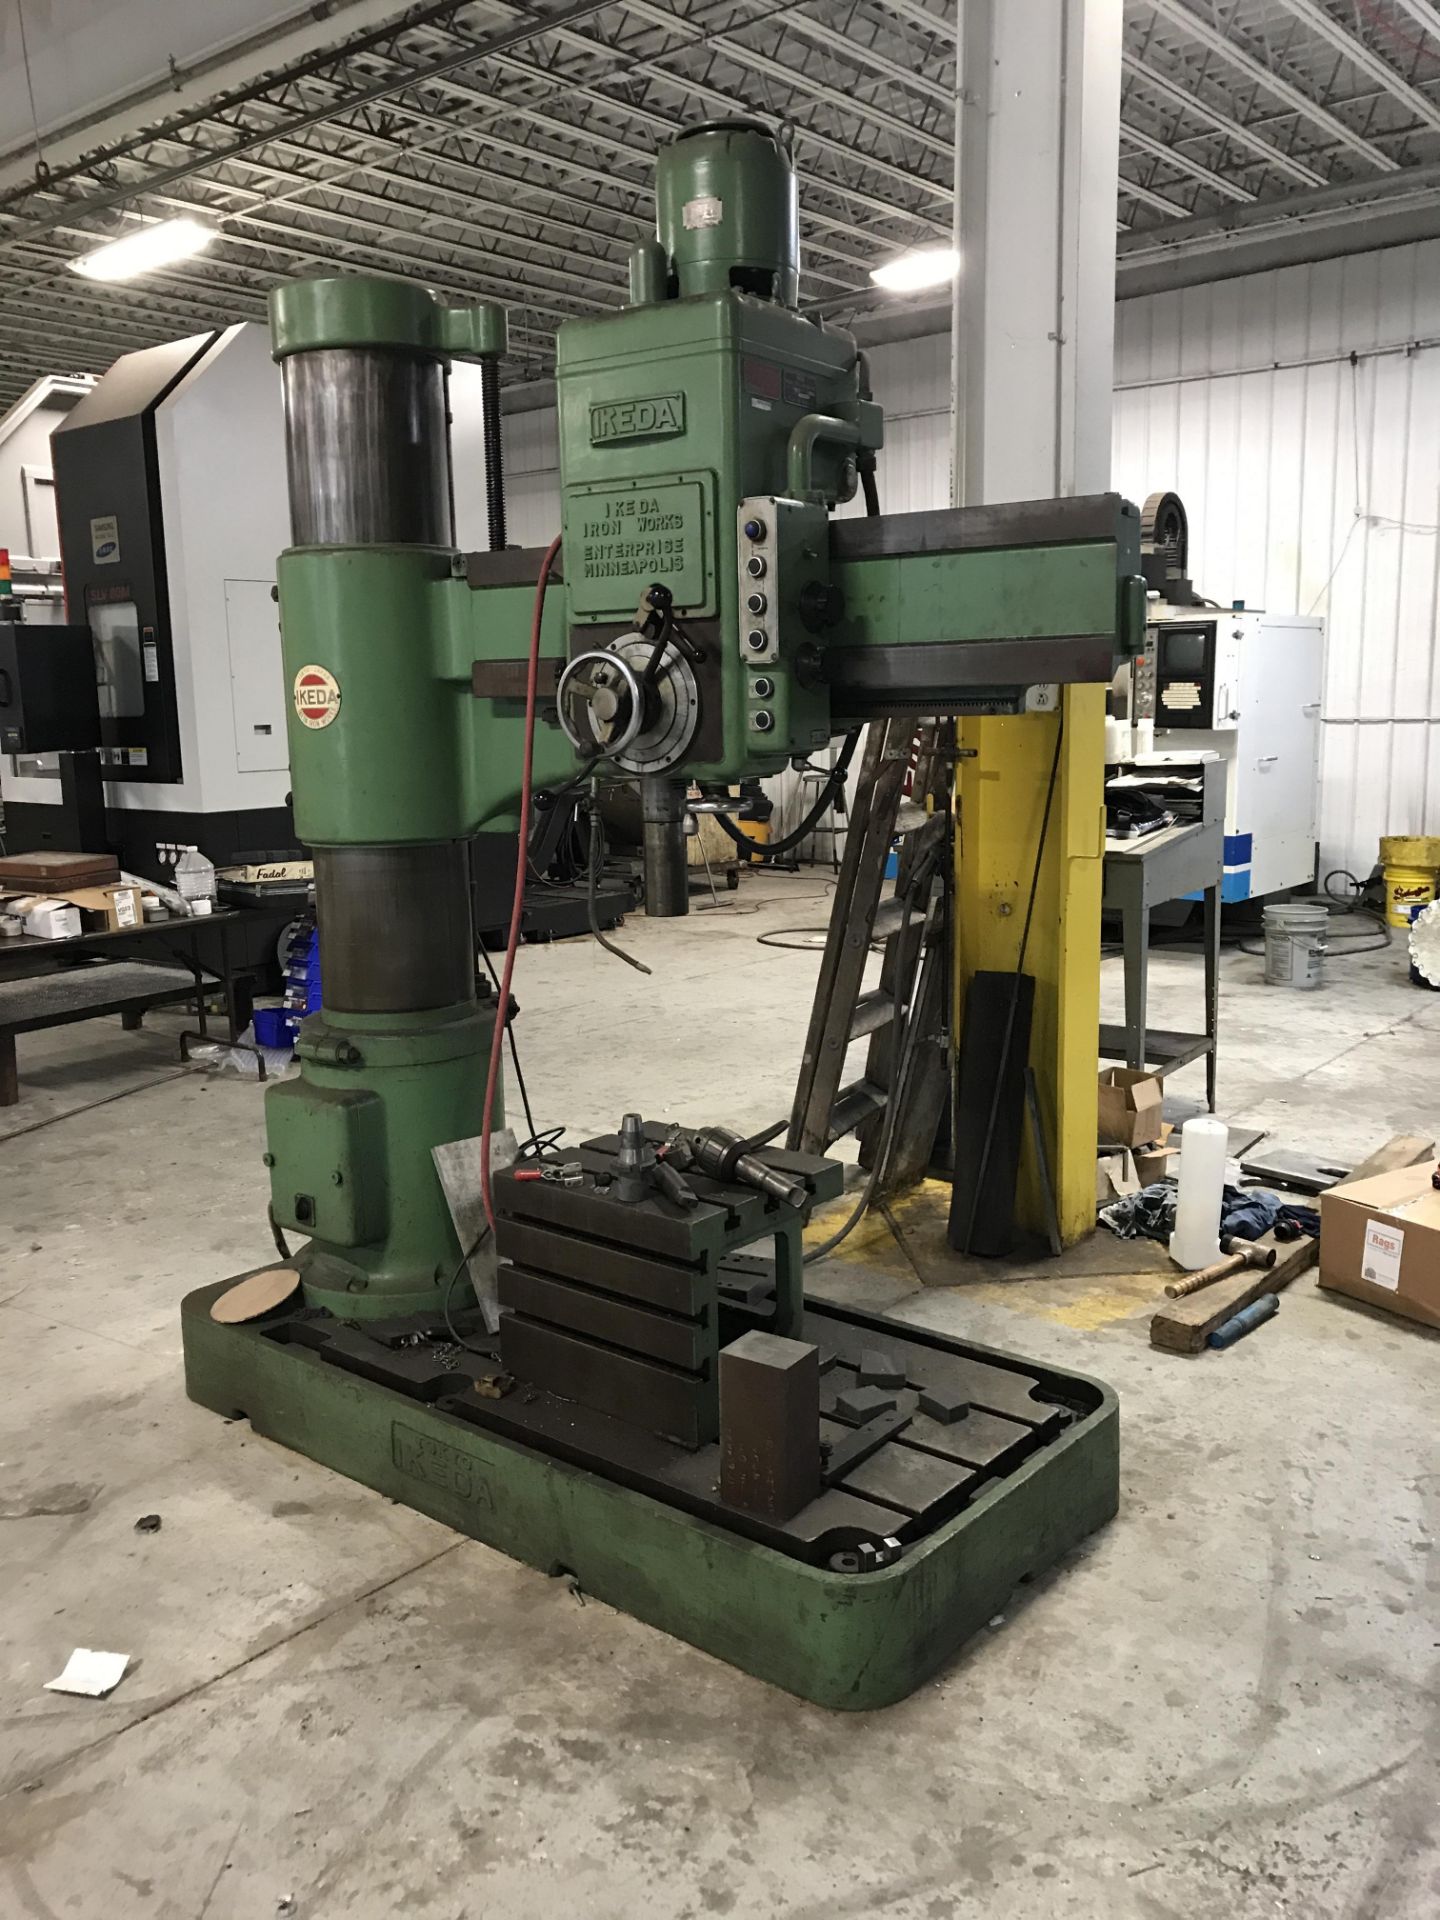 Ikeda Model RM-1300 4' x 13" Radial Arm Drill - Image 5 of 5